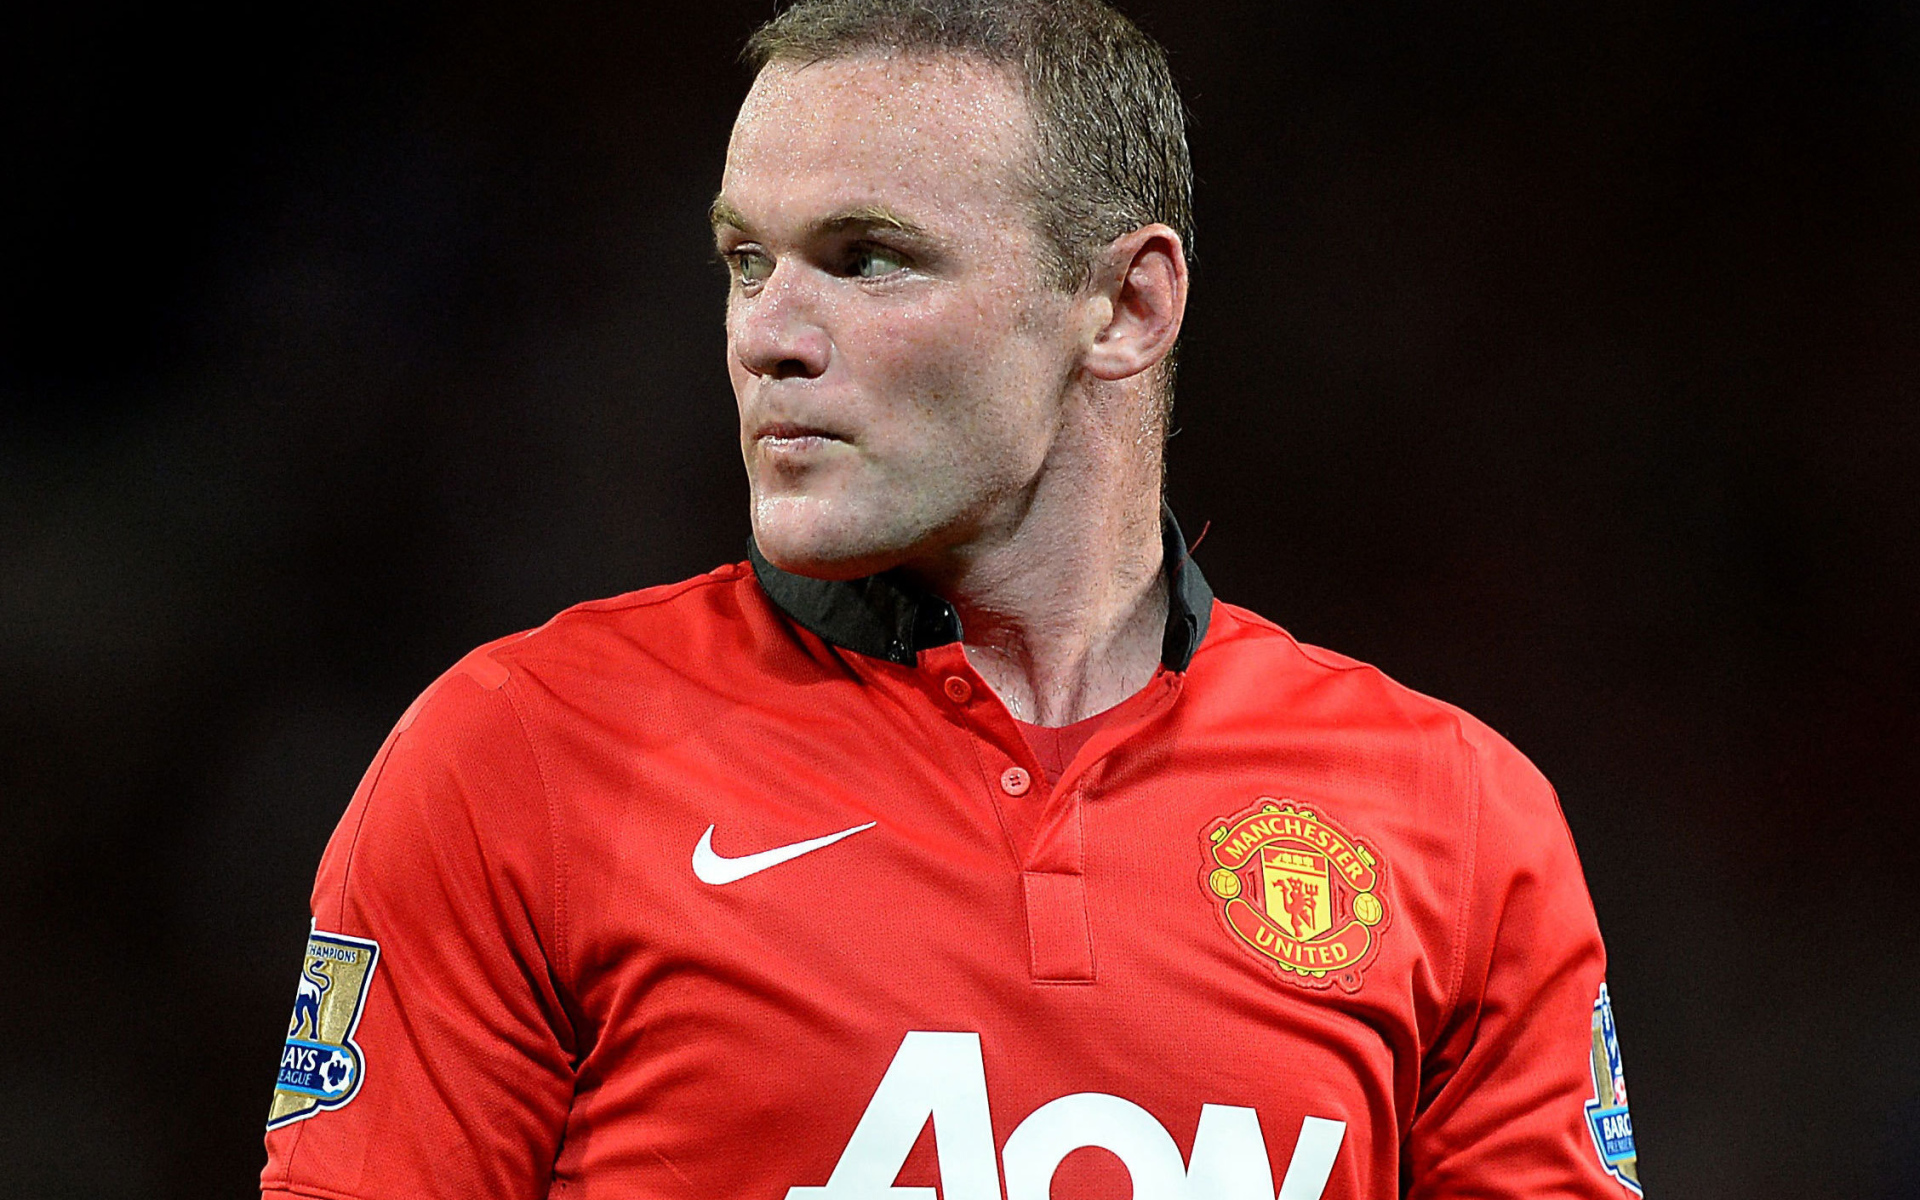 The player of Manchester United Wayne Rooney close up